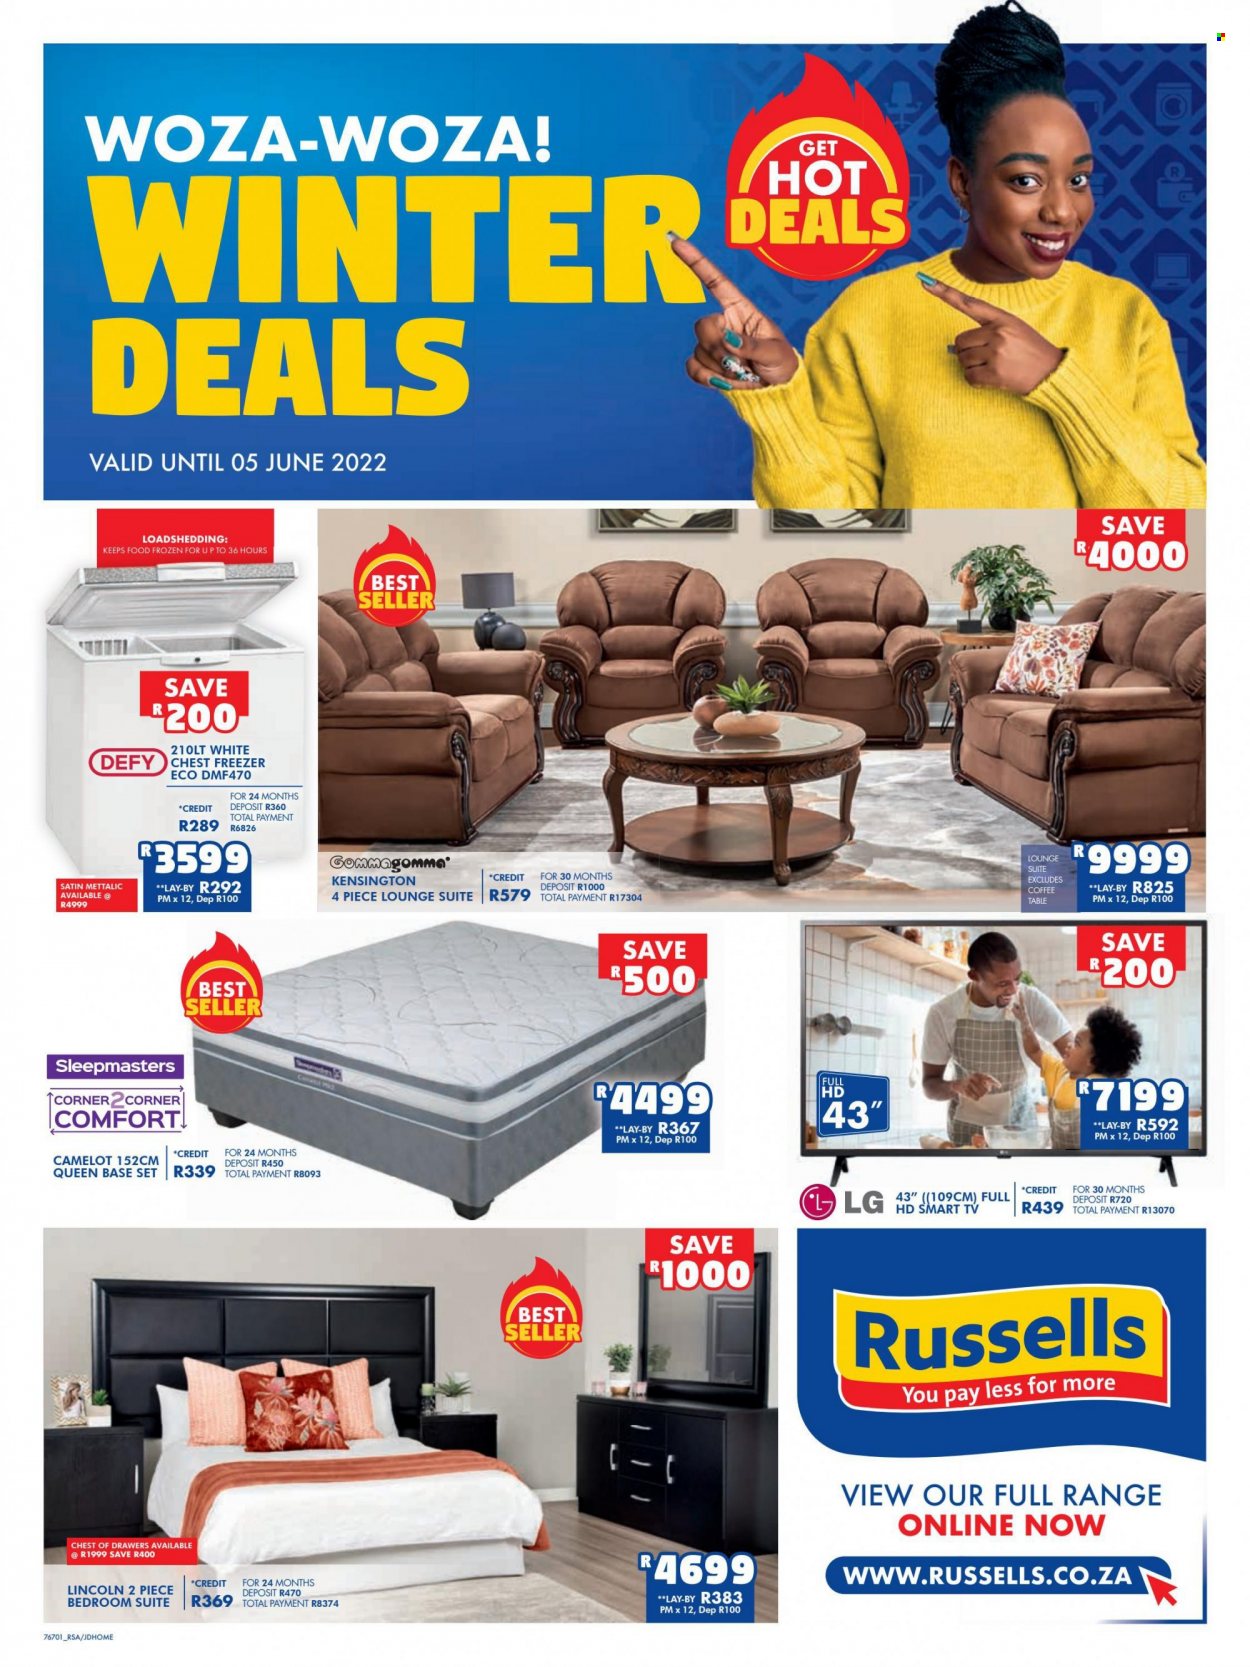 Russells Specials  - 05.09.2022 - 06.05.2022. Page 1.